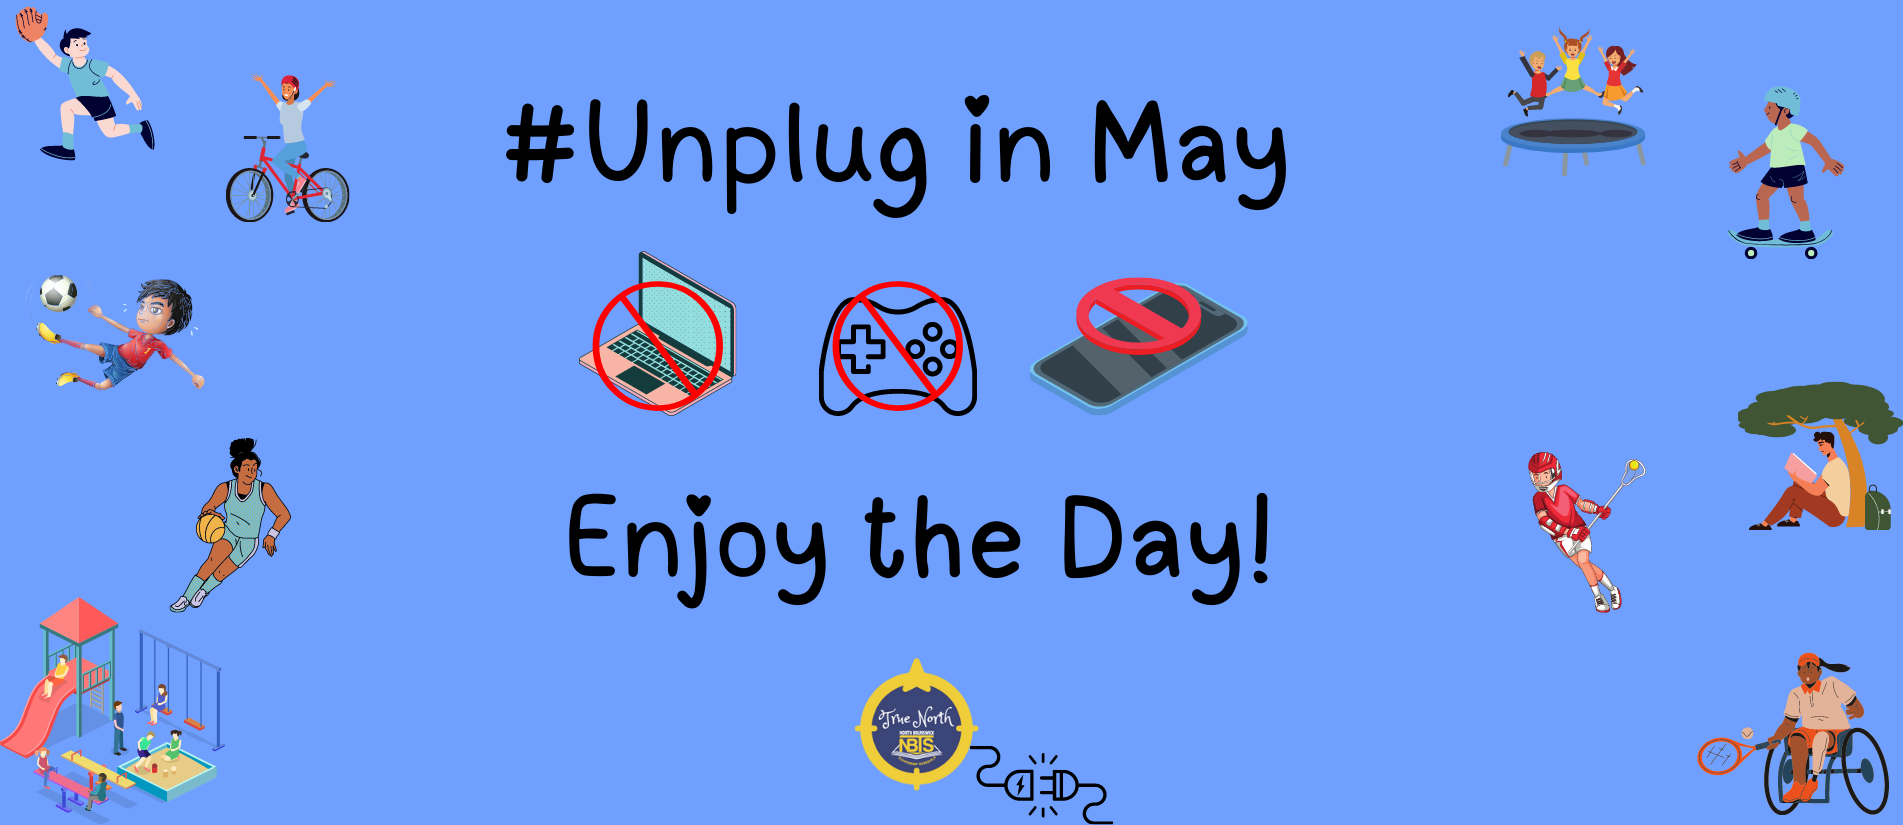 Unplug in May